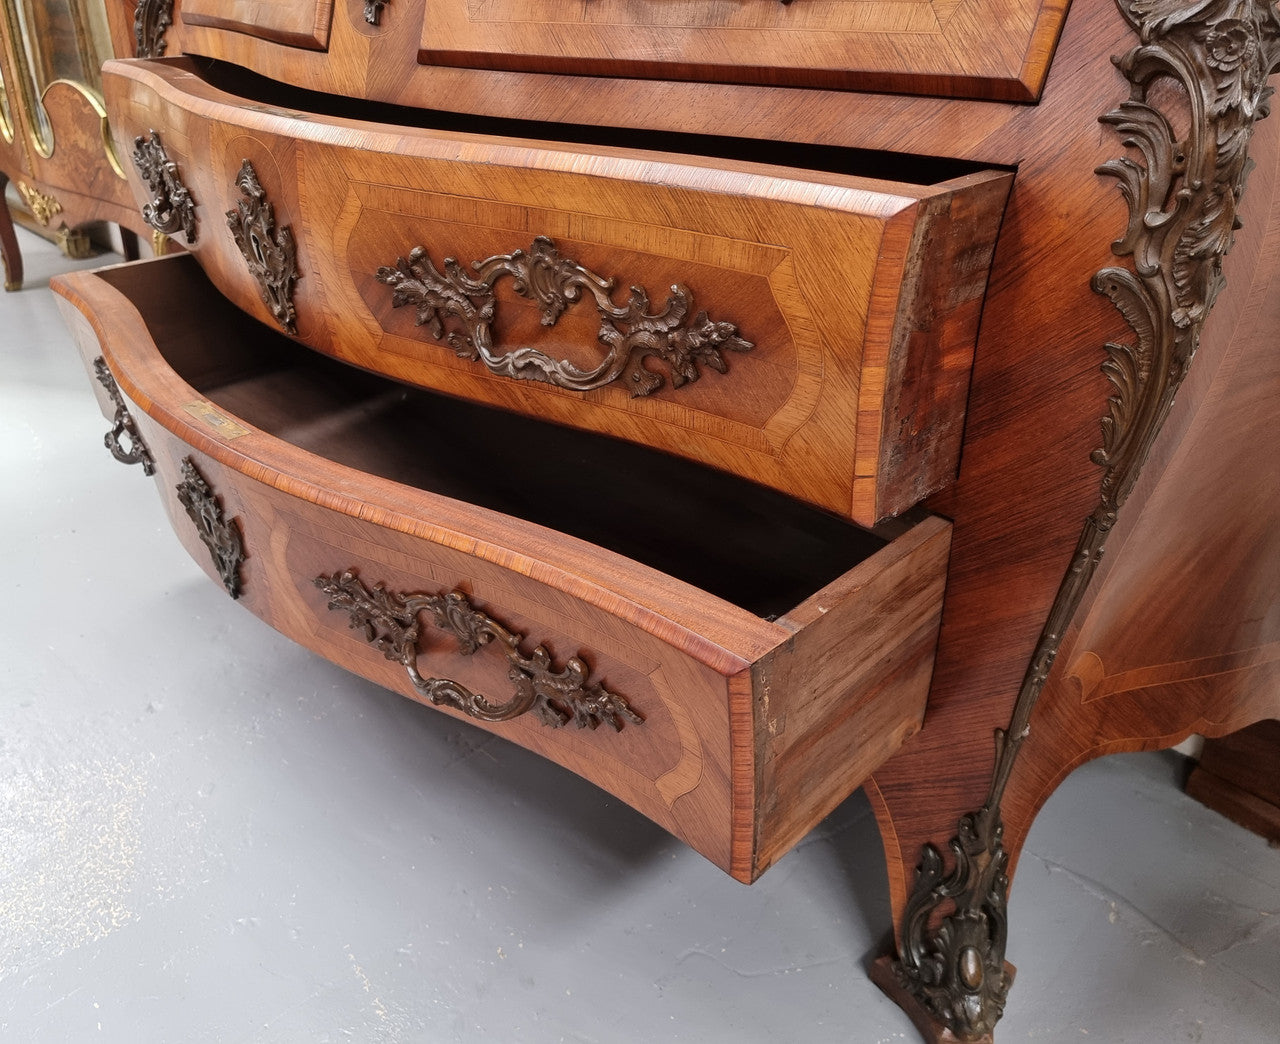 Sensational Grand French Walnut Bombe Commode with beautiful marquetry inlay. It has lovely decorative hardware and an amazing marble top in good original detailed condition.